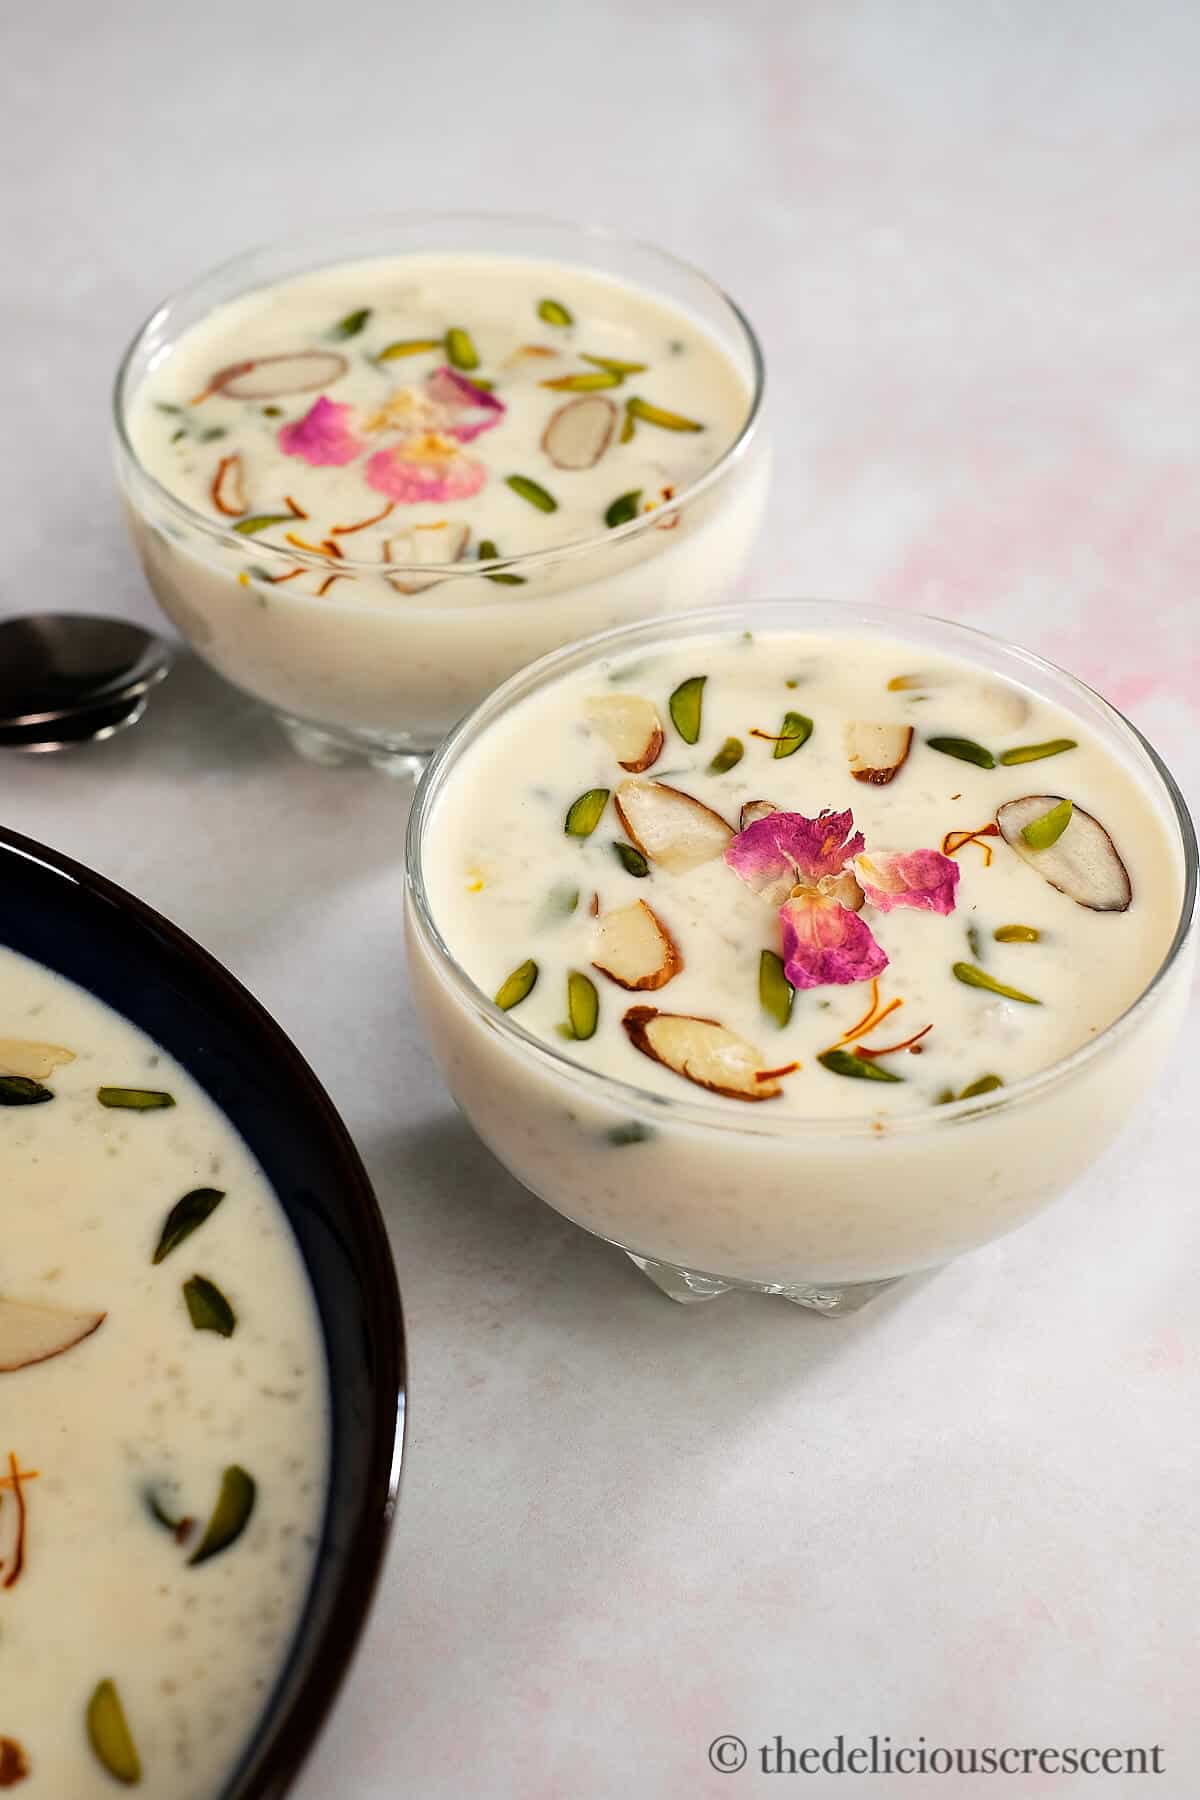 Kheer (Indian Rice Pudding) - The Delicious Crescent